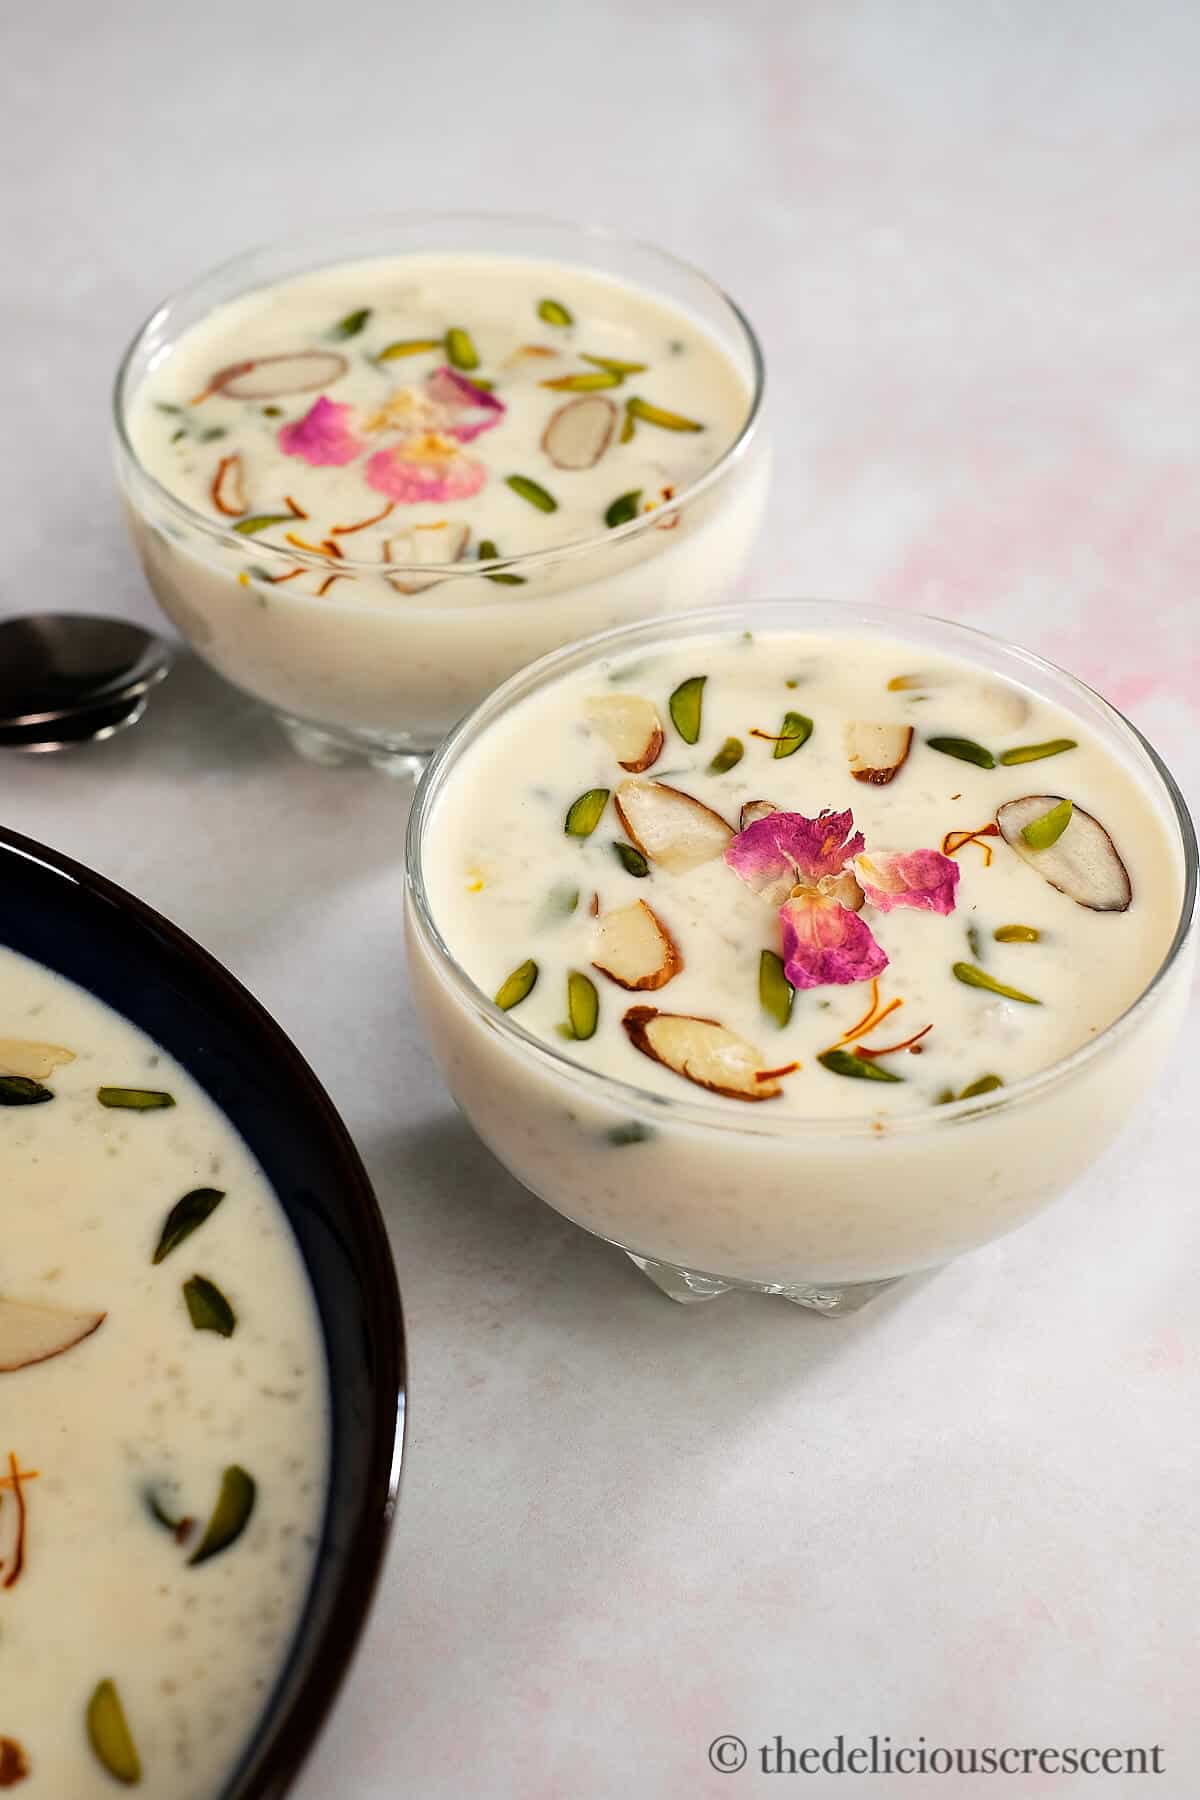 Kheer (Indian Rice Pudding) - The Delicious Crescent